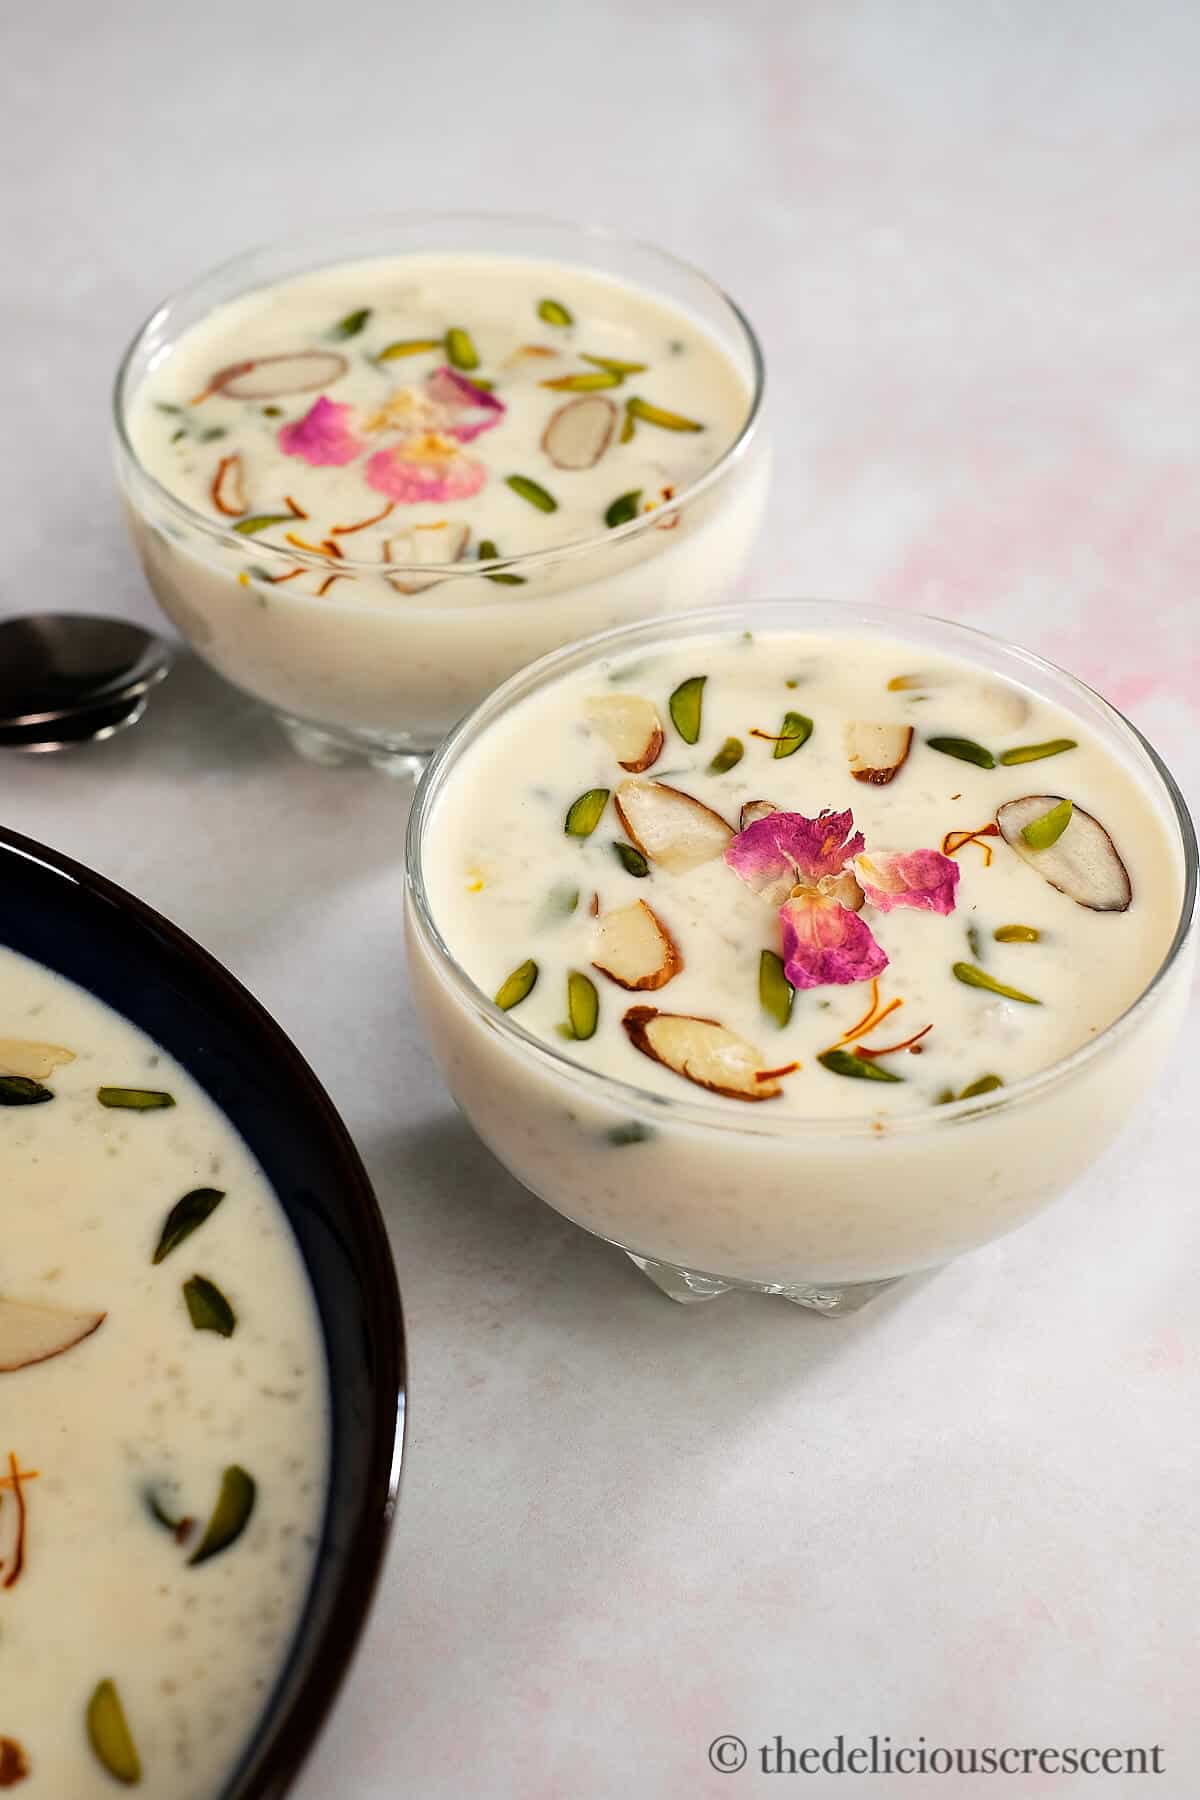 Kheer (Indian Rice Pudding) - The Delicious Crescent